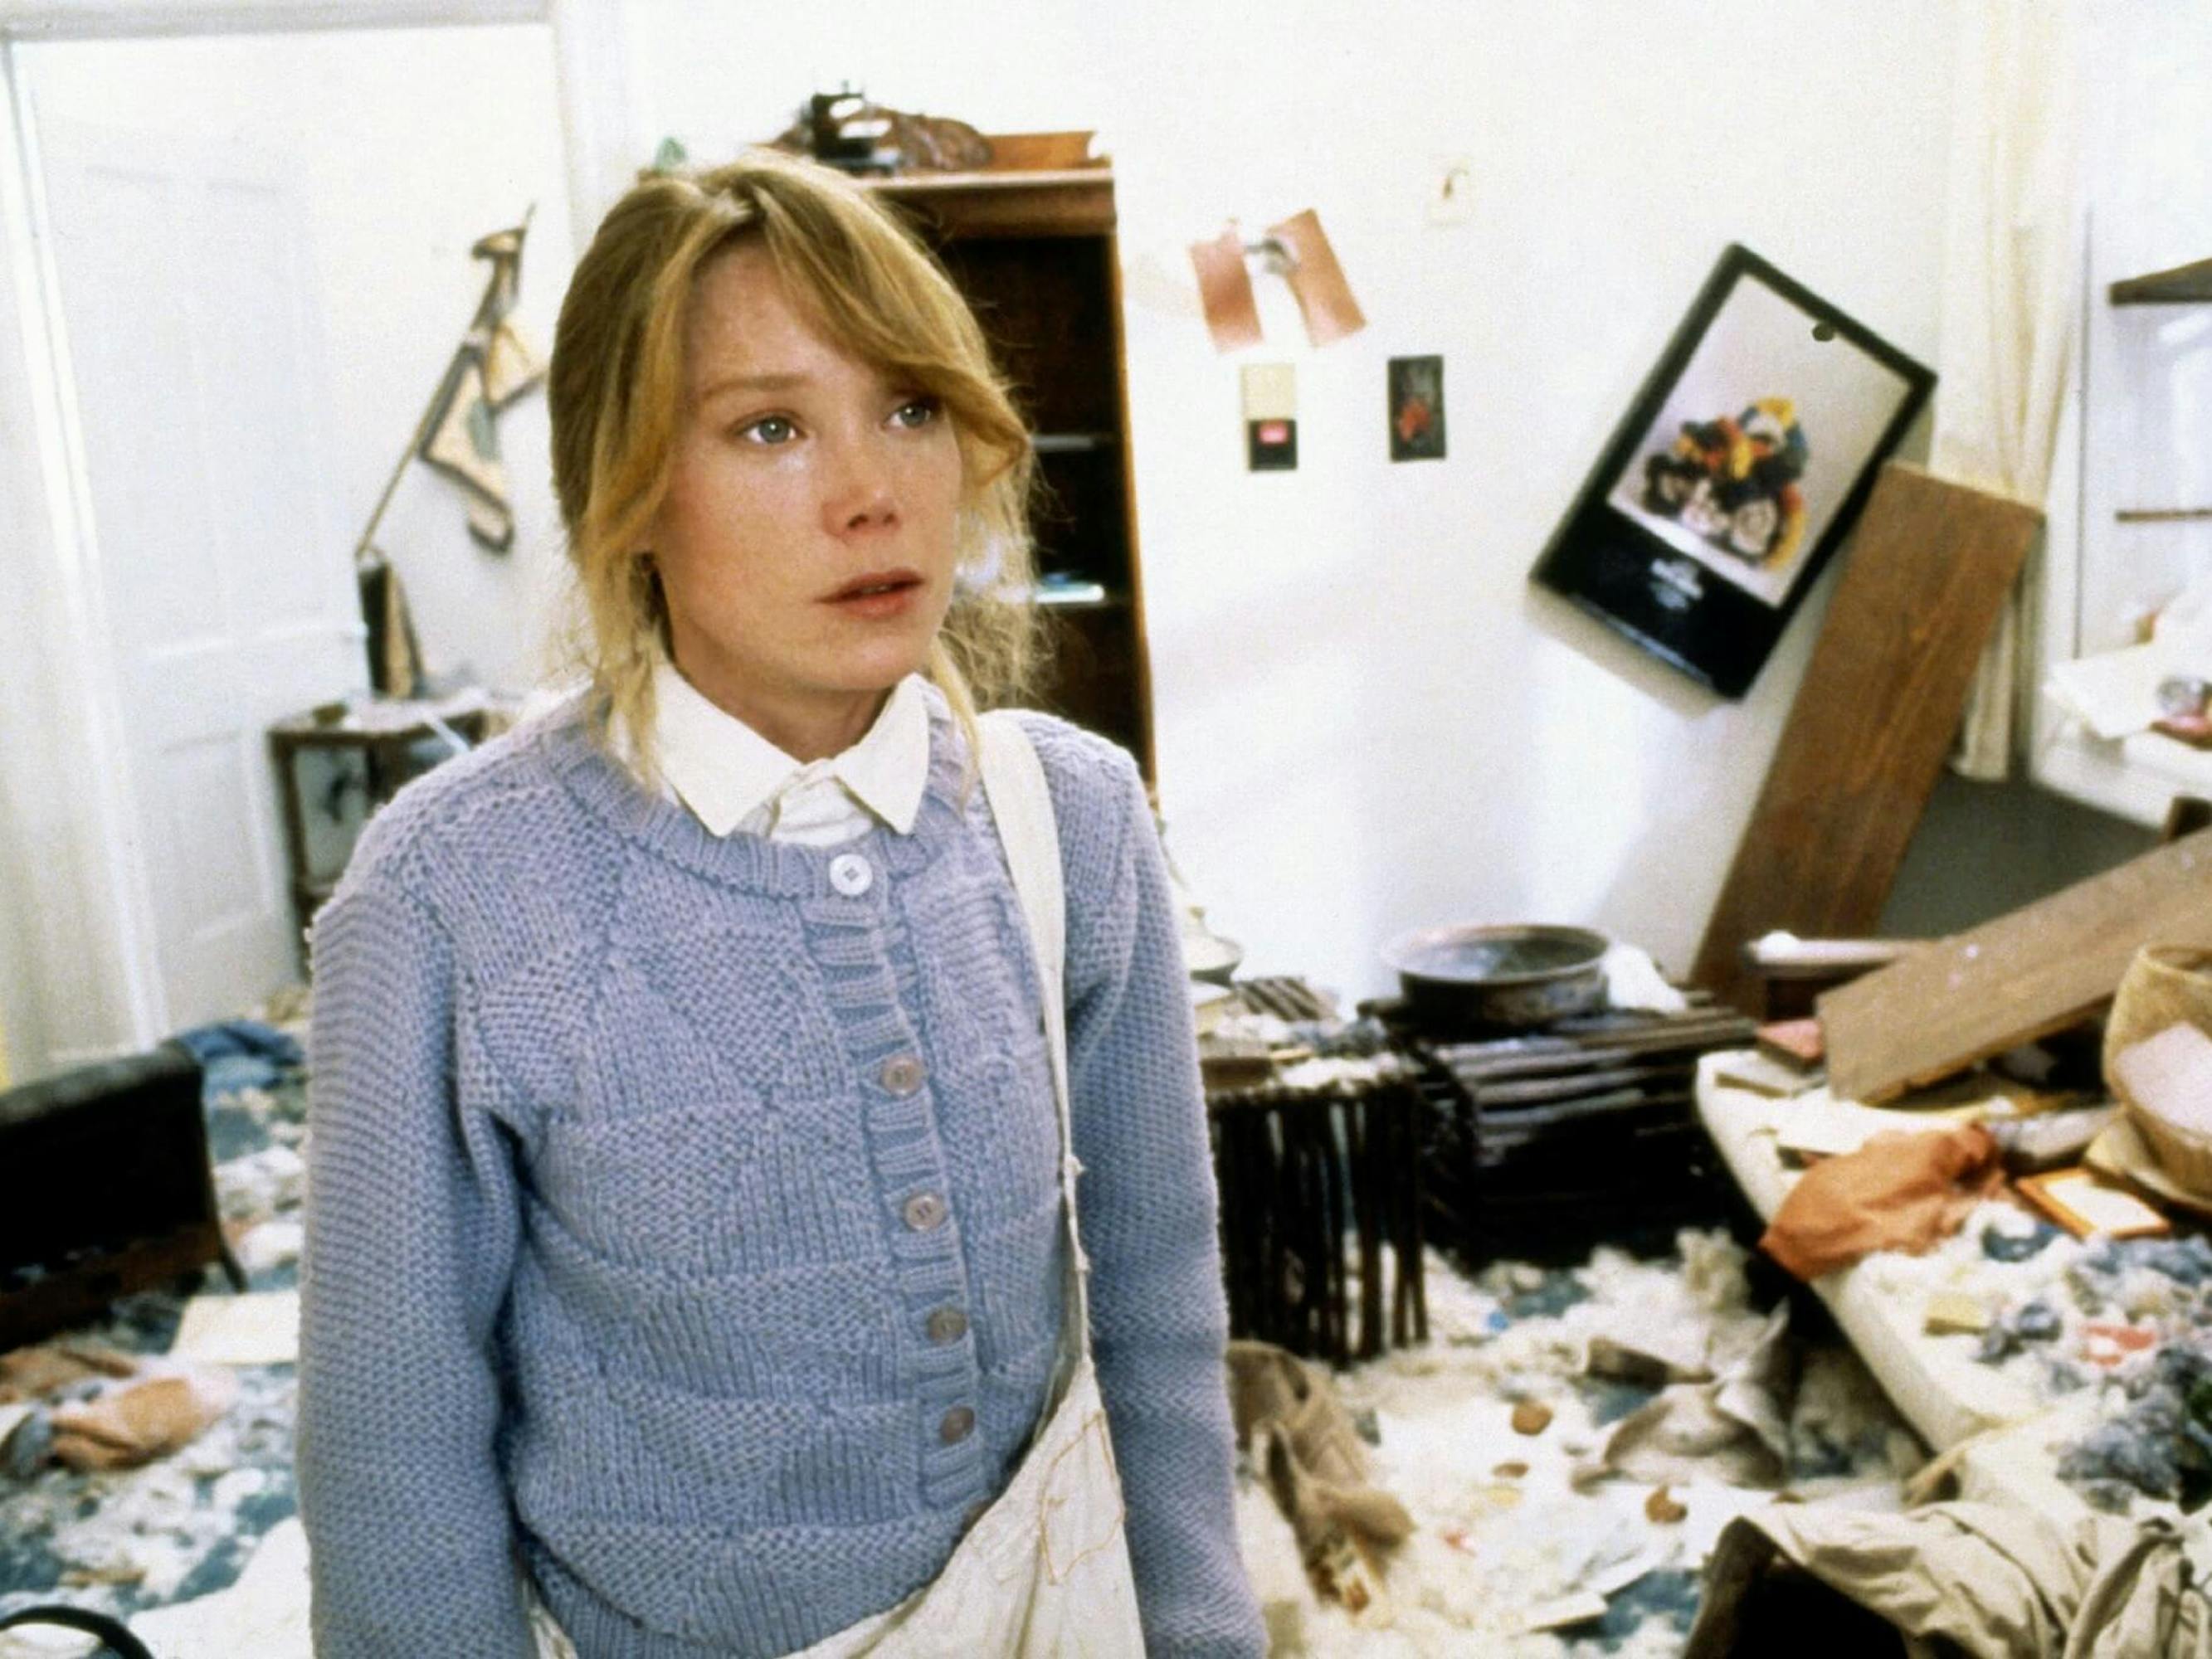 Beth Horman (Sissy Spacek) in Missing tands in a dischevled room with tears in her eyes. She wears a blue cardigan and white collared shirt.